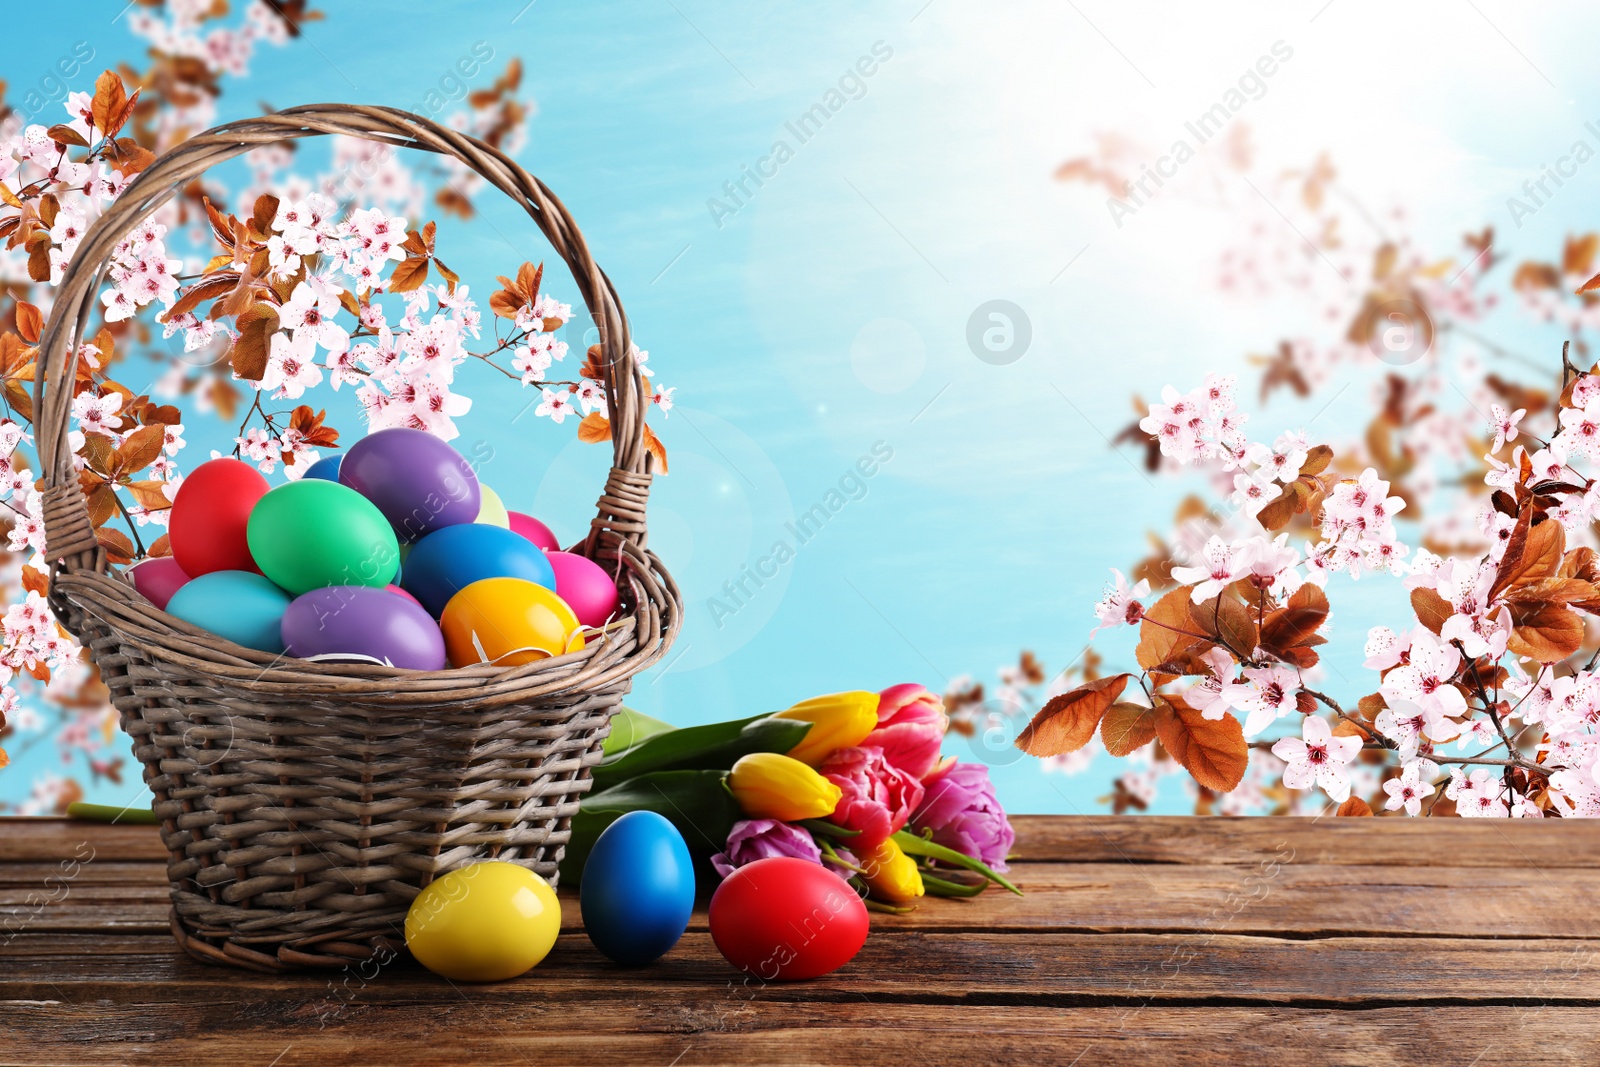 Image of Colorful Easter eggs in wicker basket and tulips on wooden table outdoors, space for text 